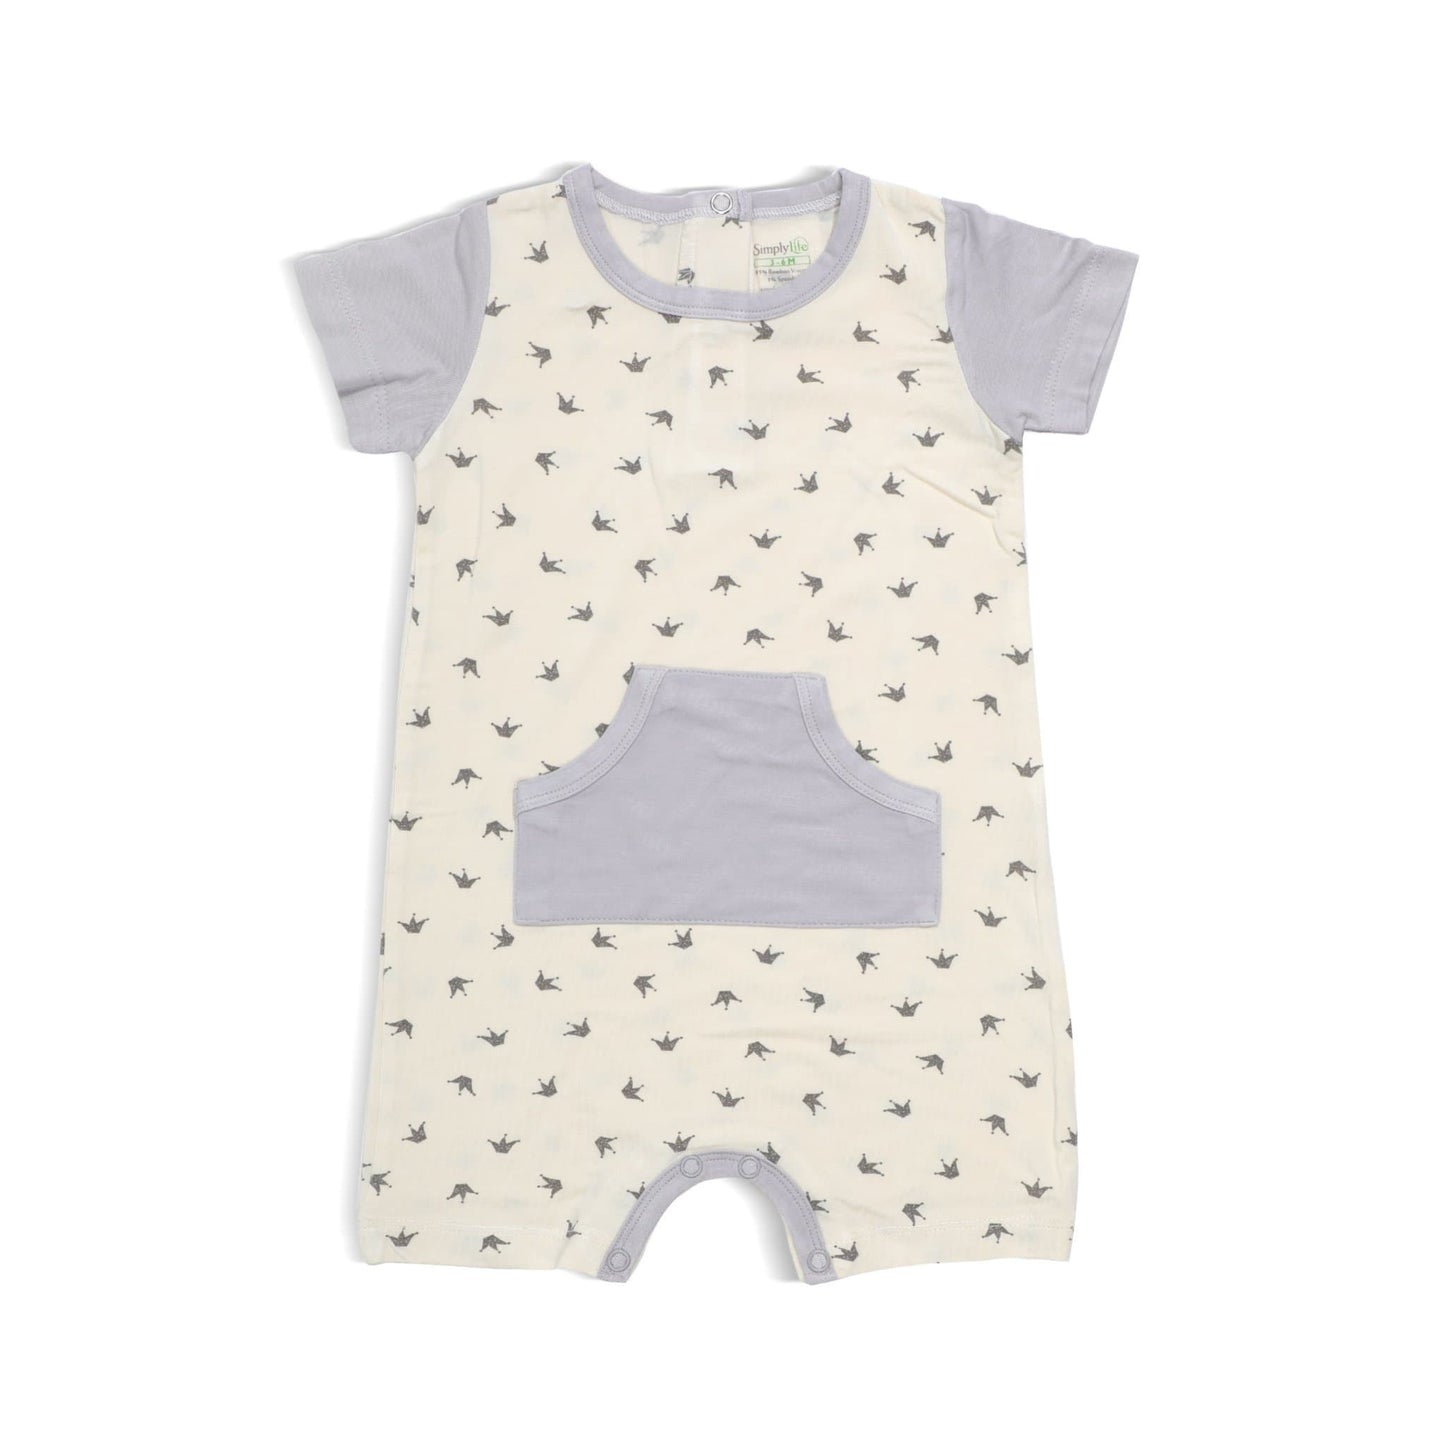 Royale - Short-sleeved Shortall with Front Pockets by simplylifebaby